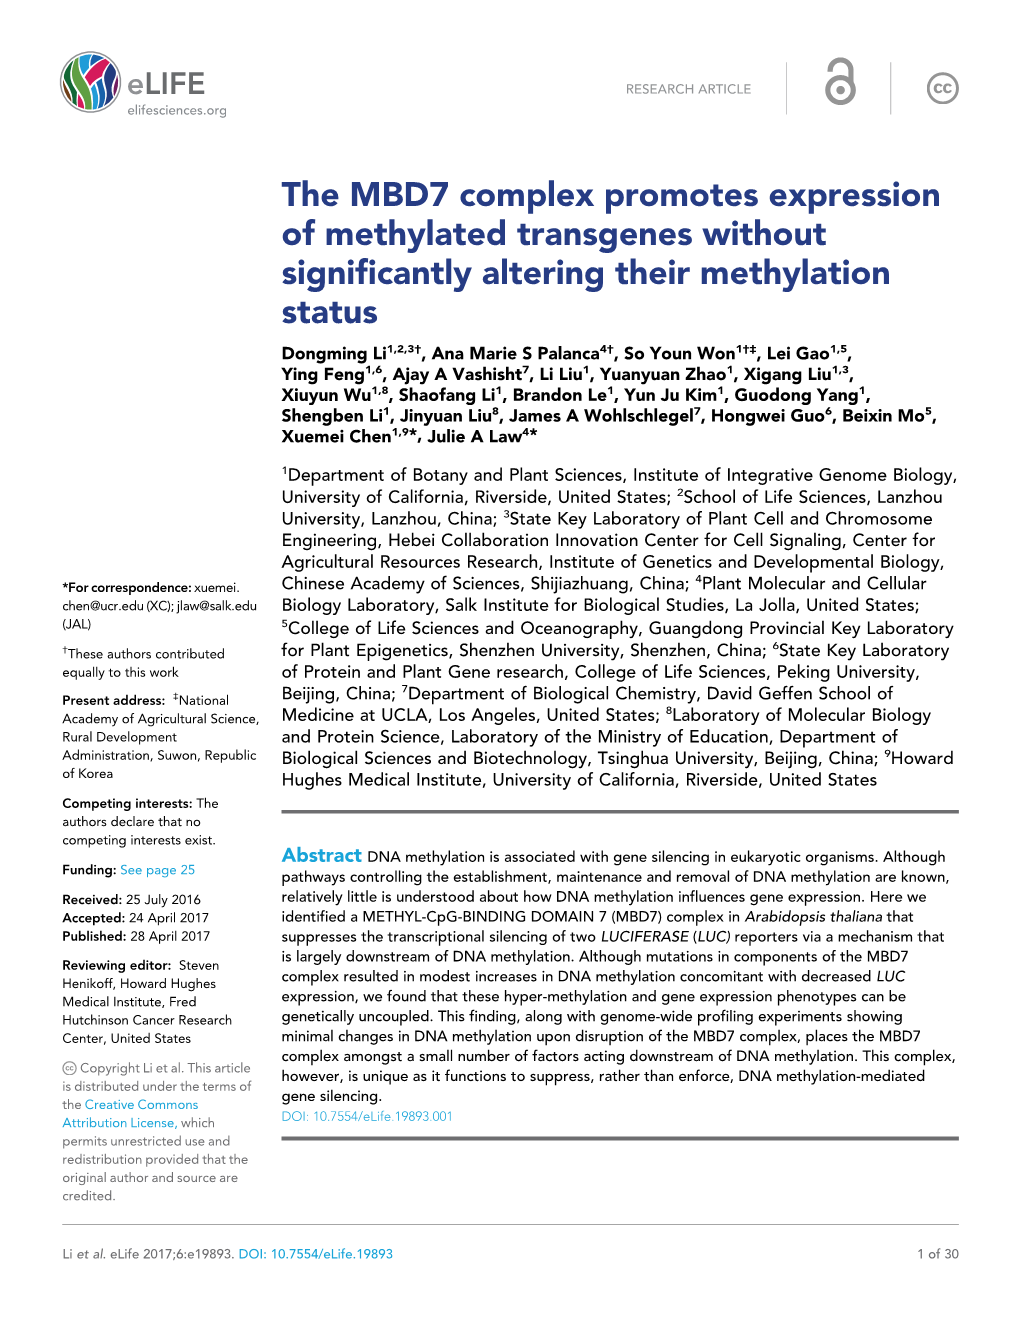 The MBD7 Complex Promotes Expression of Methylated